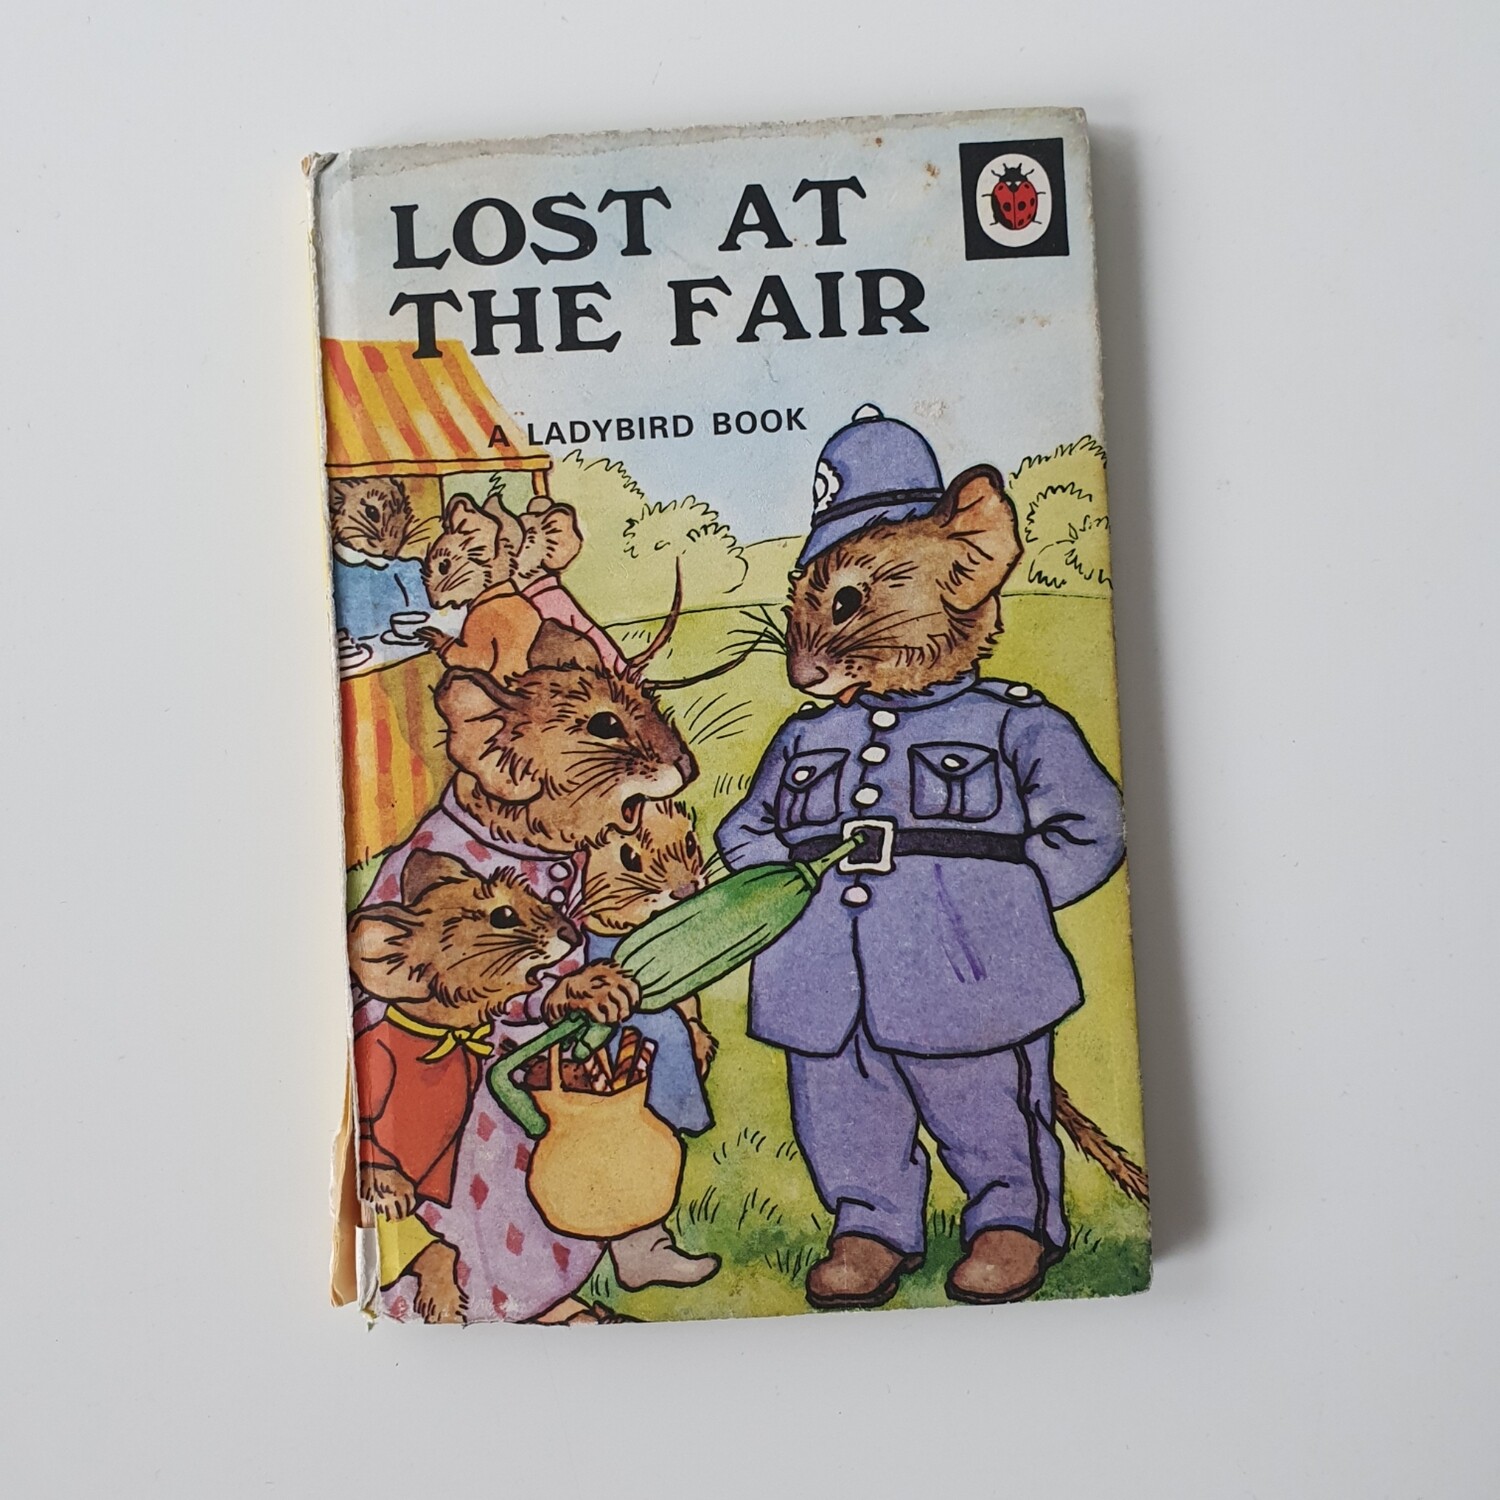 Lost at the Fair Notebook - Ladybird book